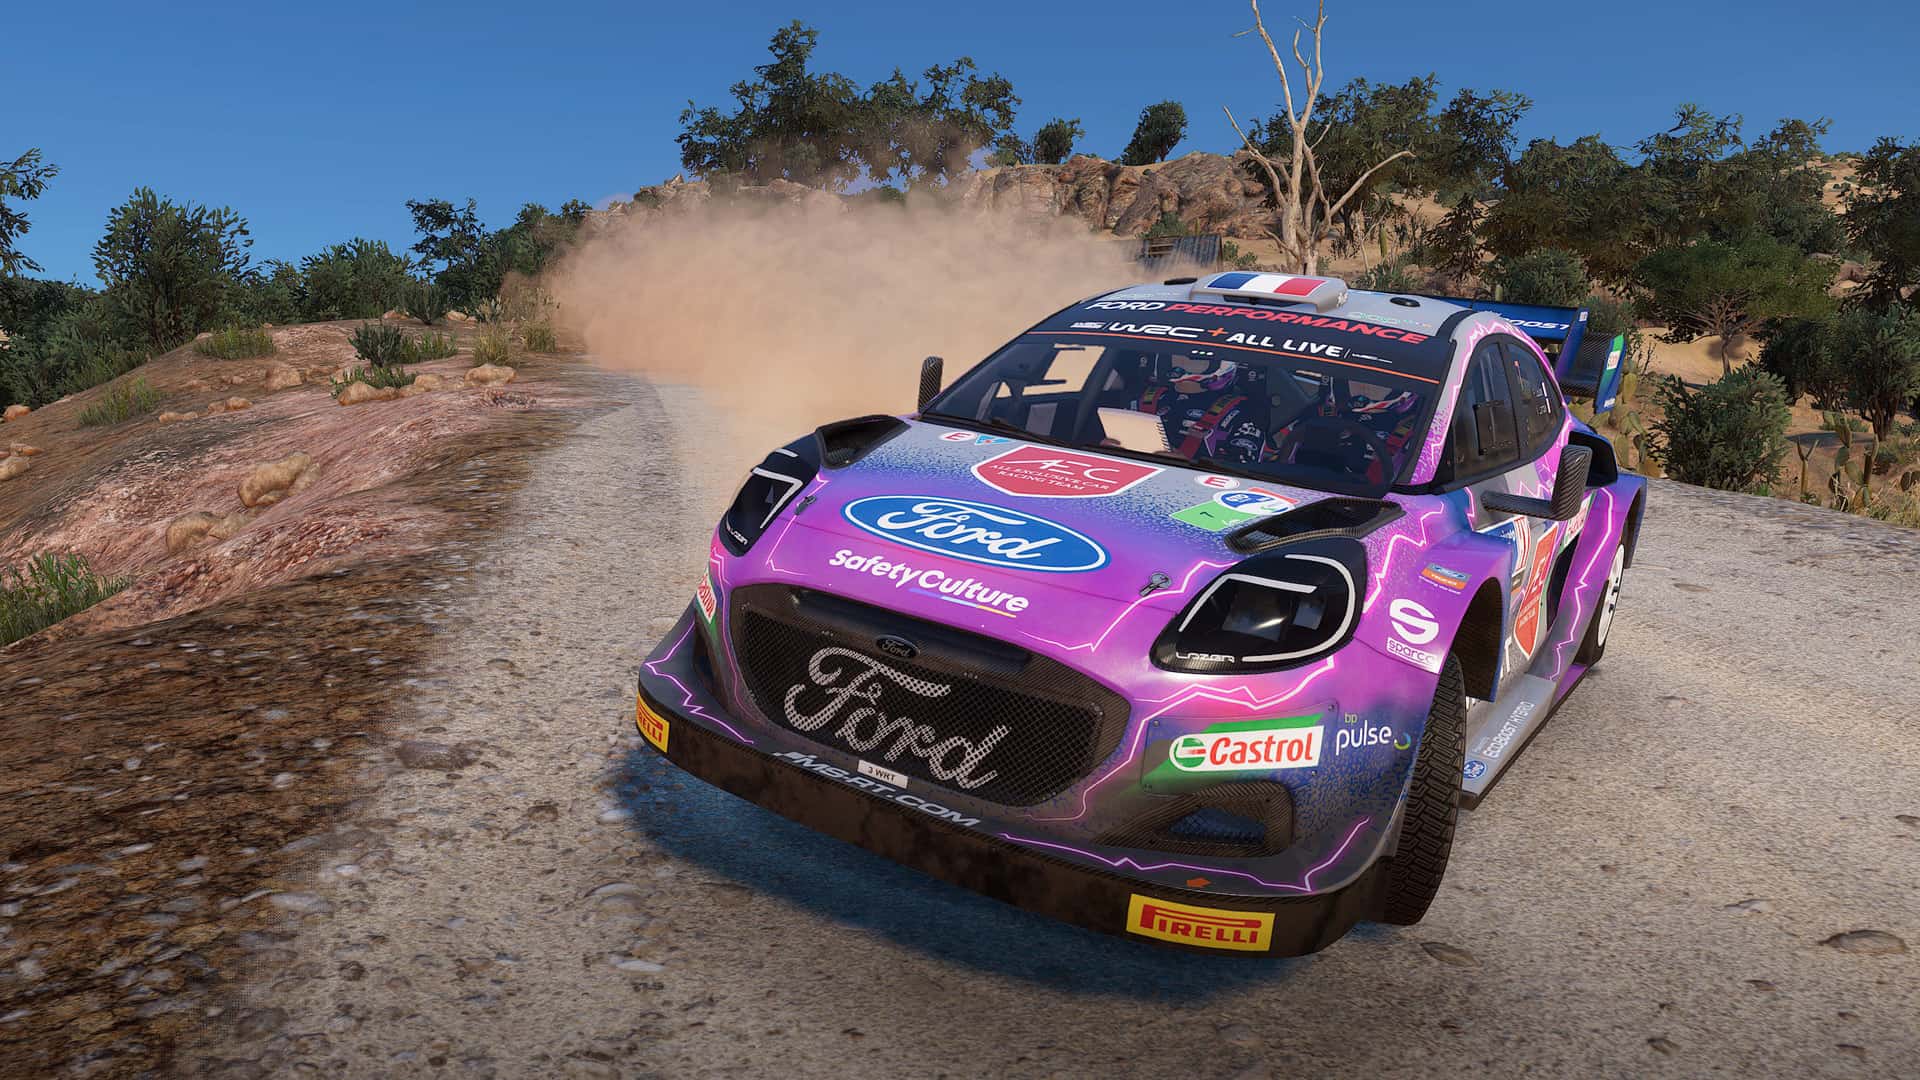 WRC Generations releases on Switch 1st December